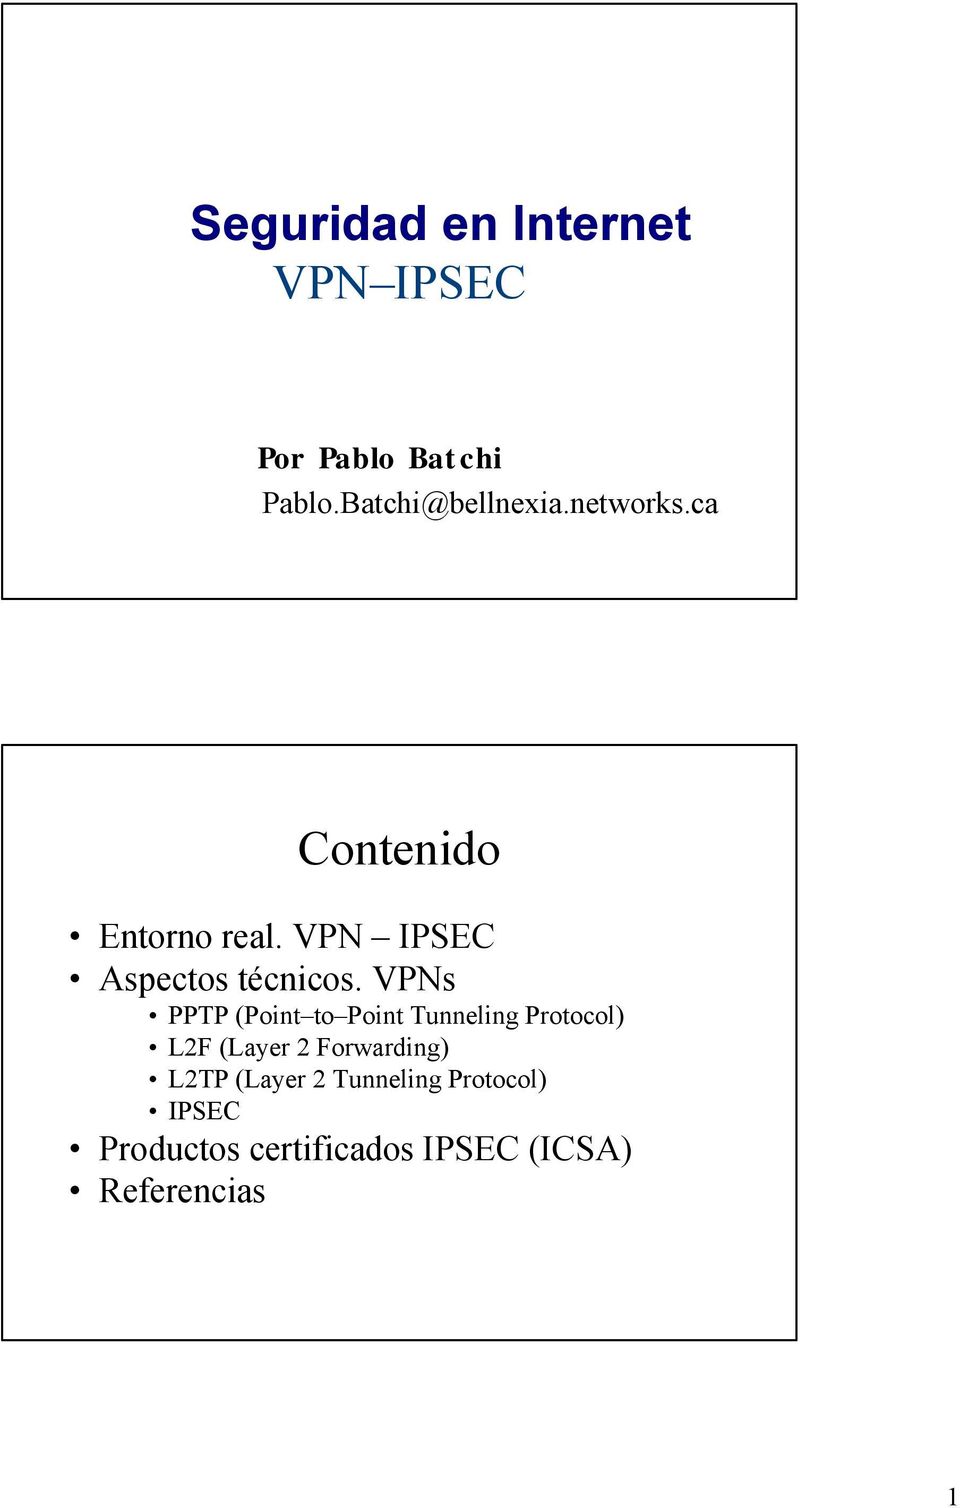 VPNs PPTP (Point to Point Tunneling Protocol) L2F (Layer 2 Forwarding)